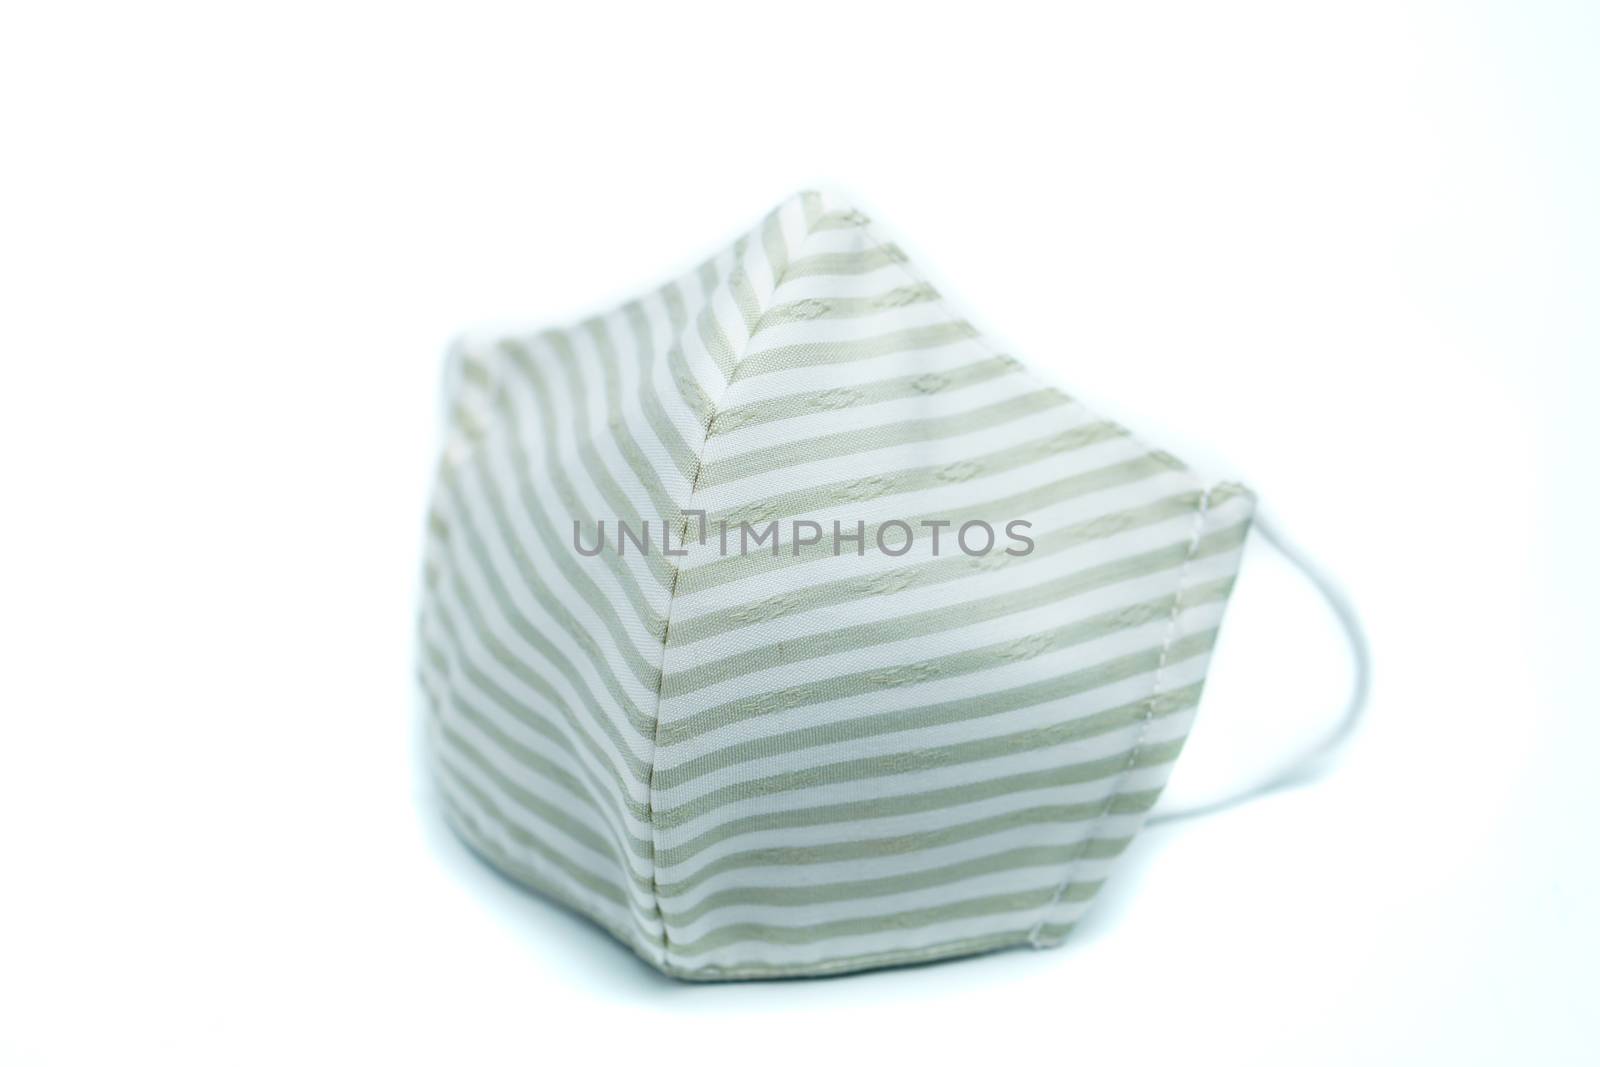 Fabric face mask or protective raspiratory mask for spreading virus on white background. isolated